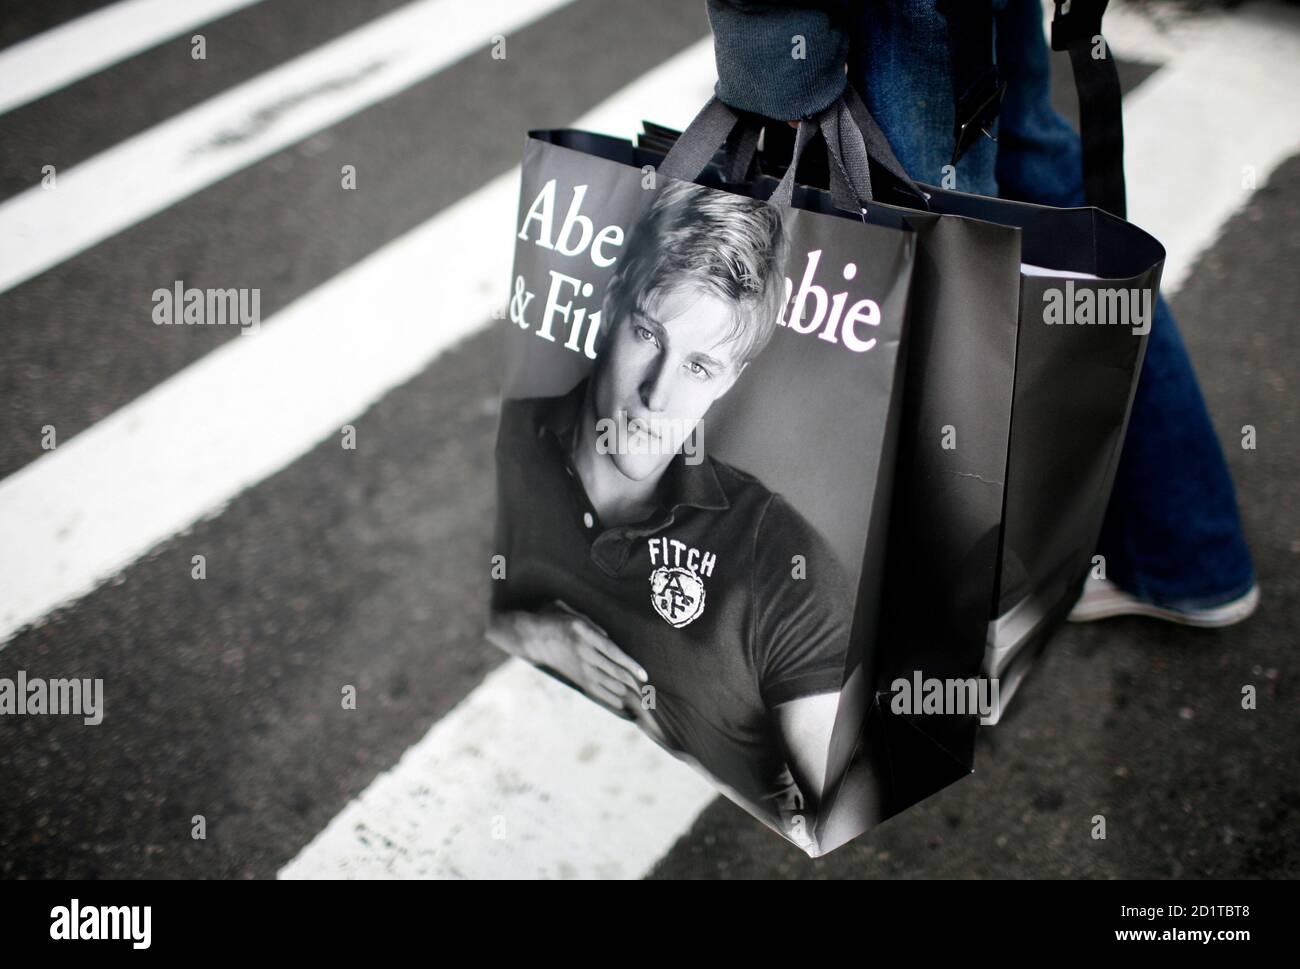 A man holds shopping bags from retailer Abercrombie & Fitch while waiting  to cross a street in New York October 8, 2009. U.S. retailers posted their  first monthly sales increase in more